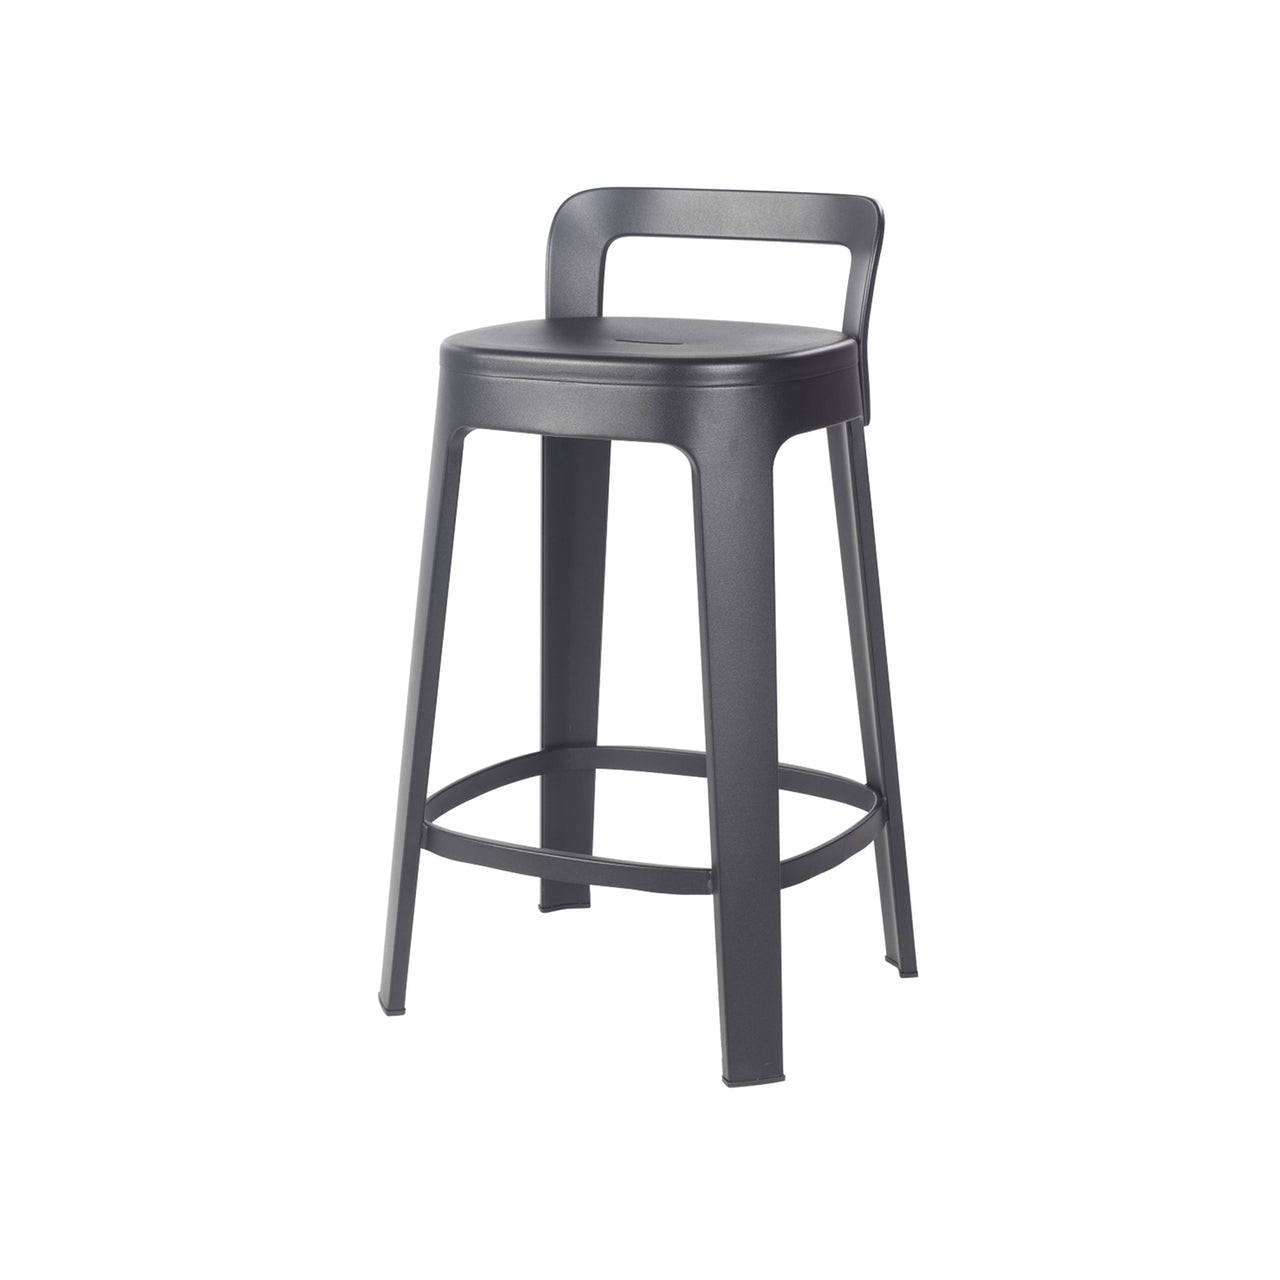 Ombra Bar + Counter Stool with Backrest: Counter + Black